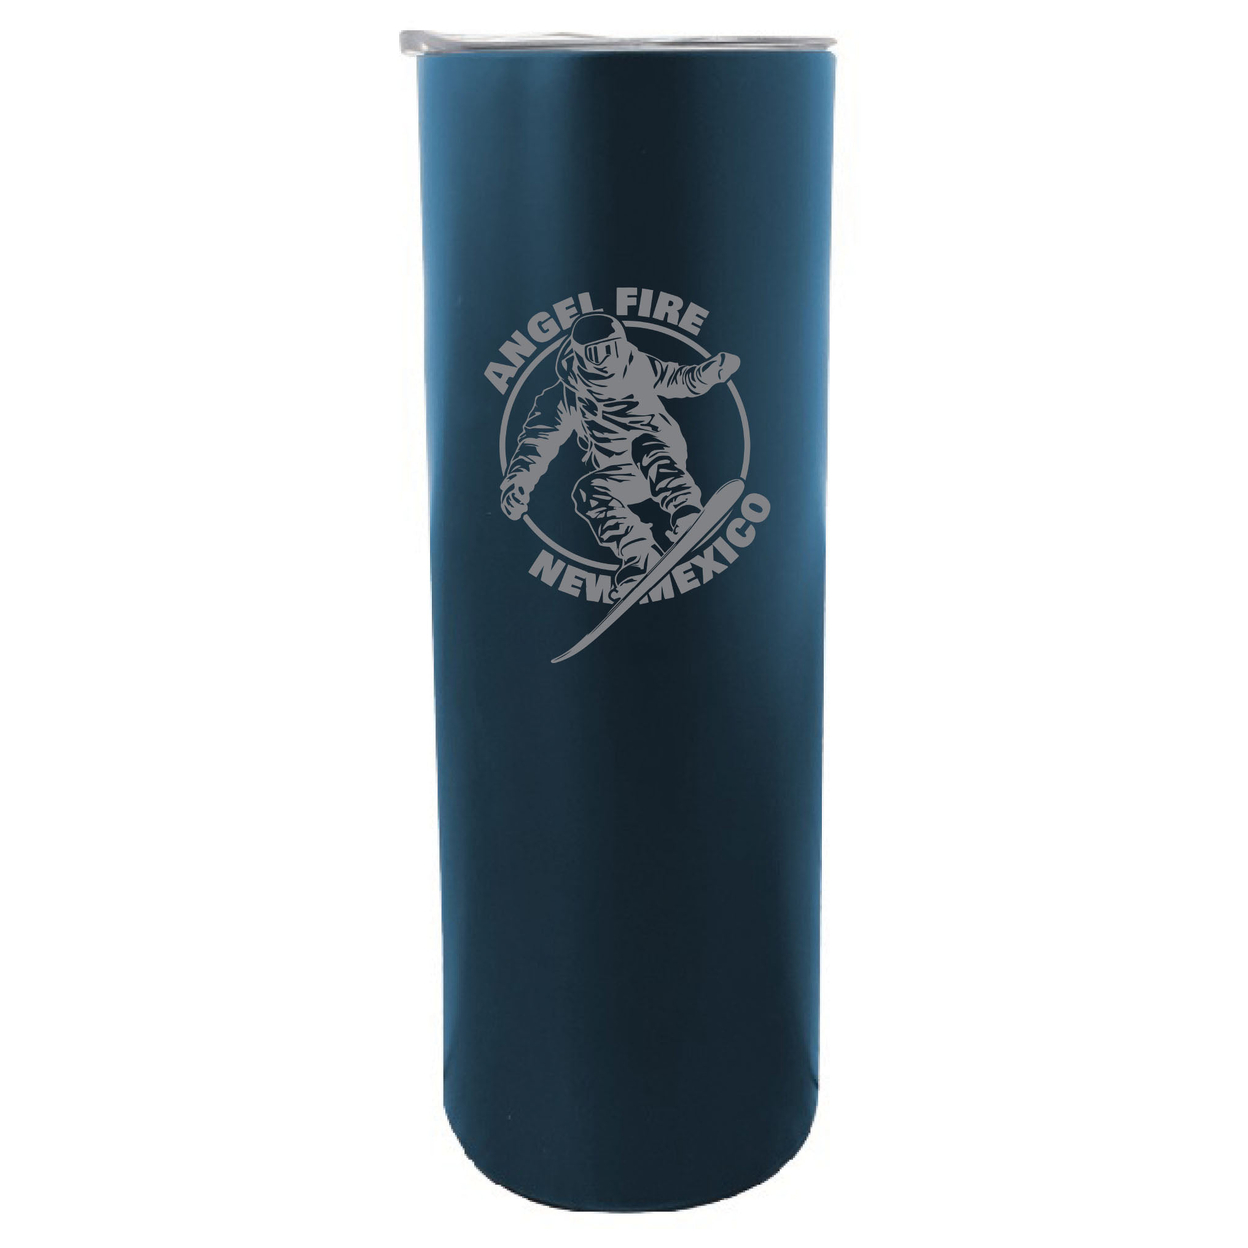 Angel Fire New Mexico Souvenir 20 Oz Engraved Insulated Stainless Steel Skinny Tumbler - Navy,,2-Pack